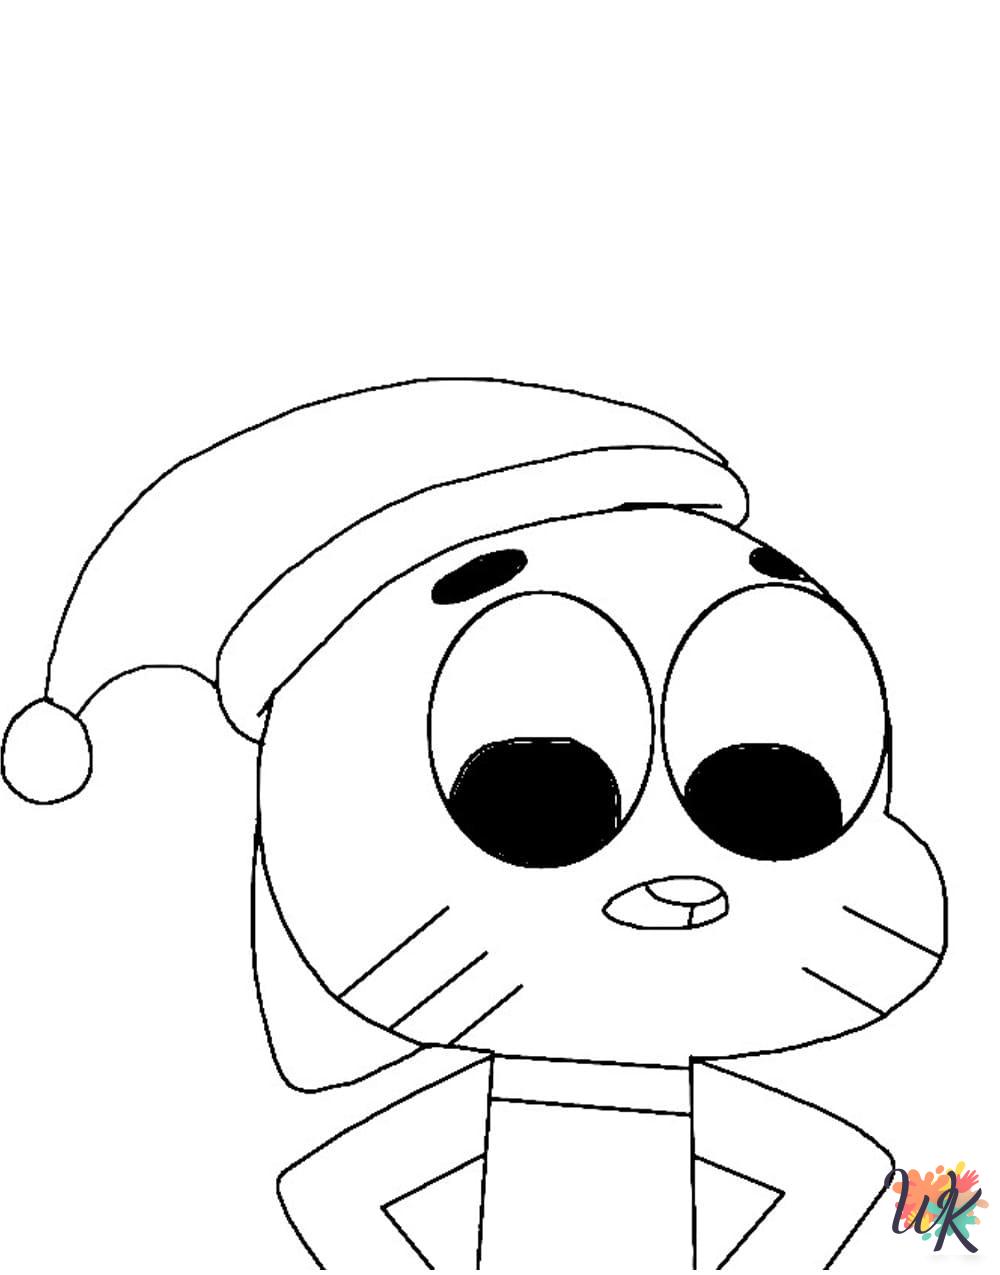 Gumball coloring pages for adults 1